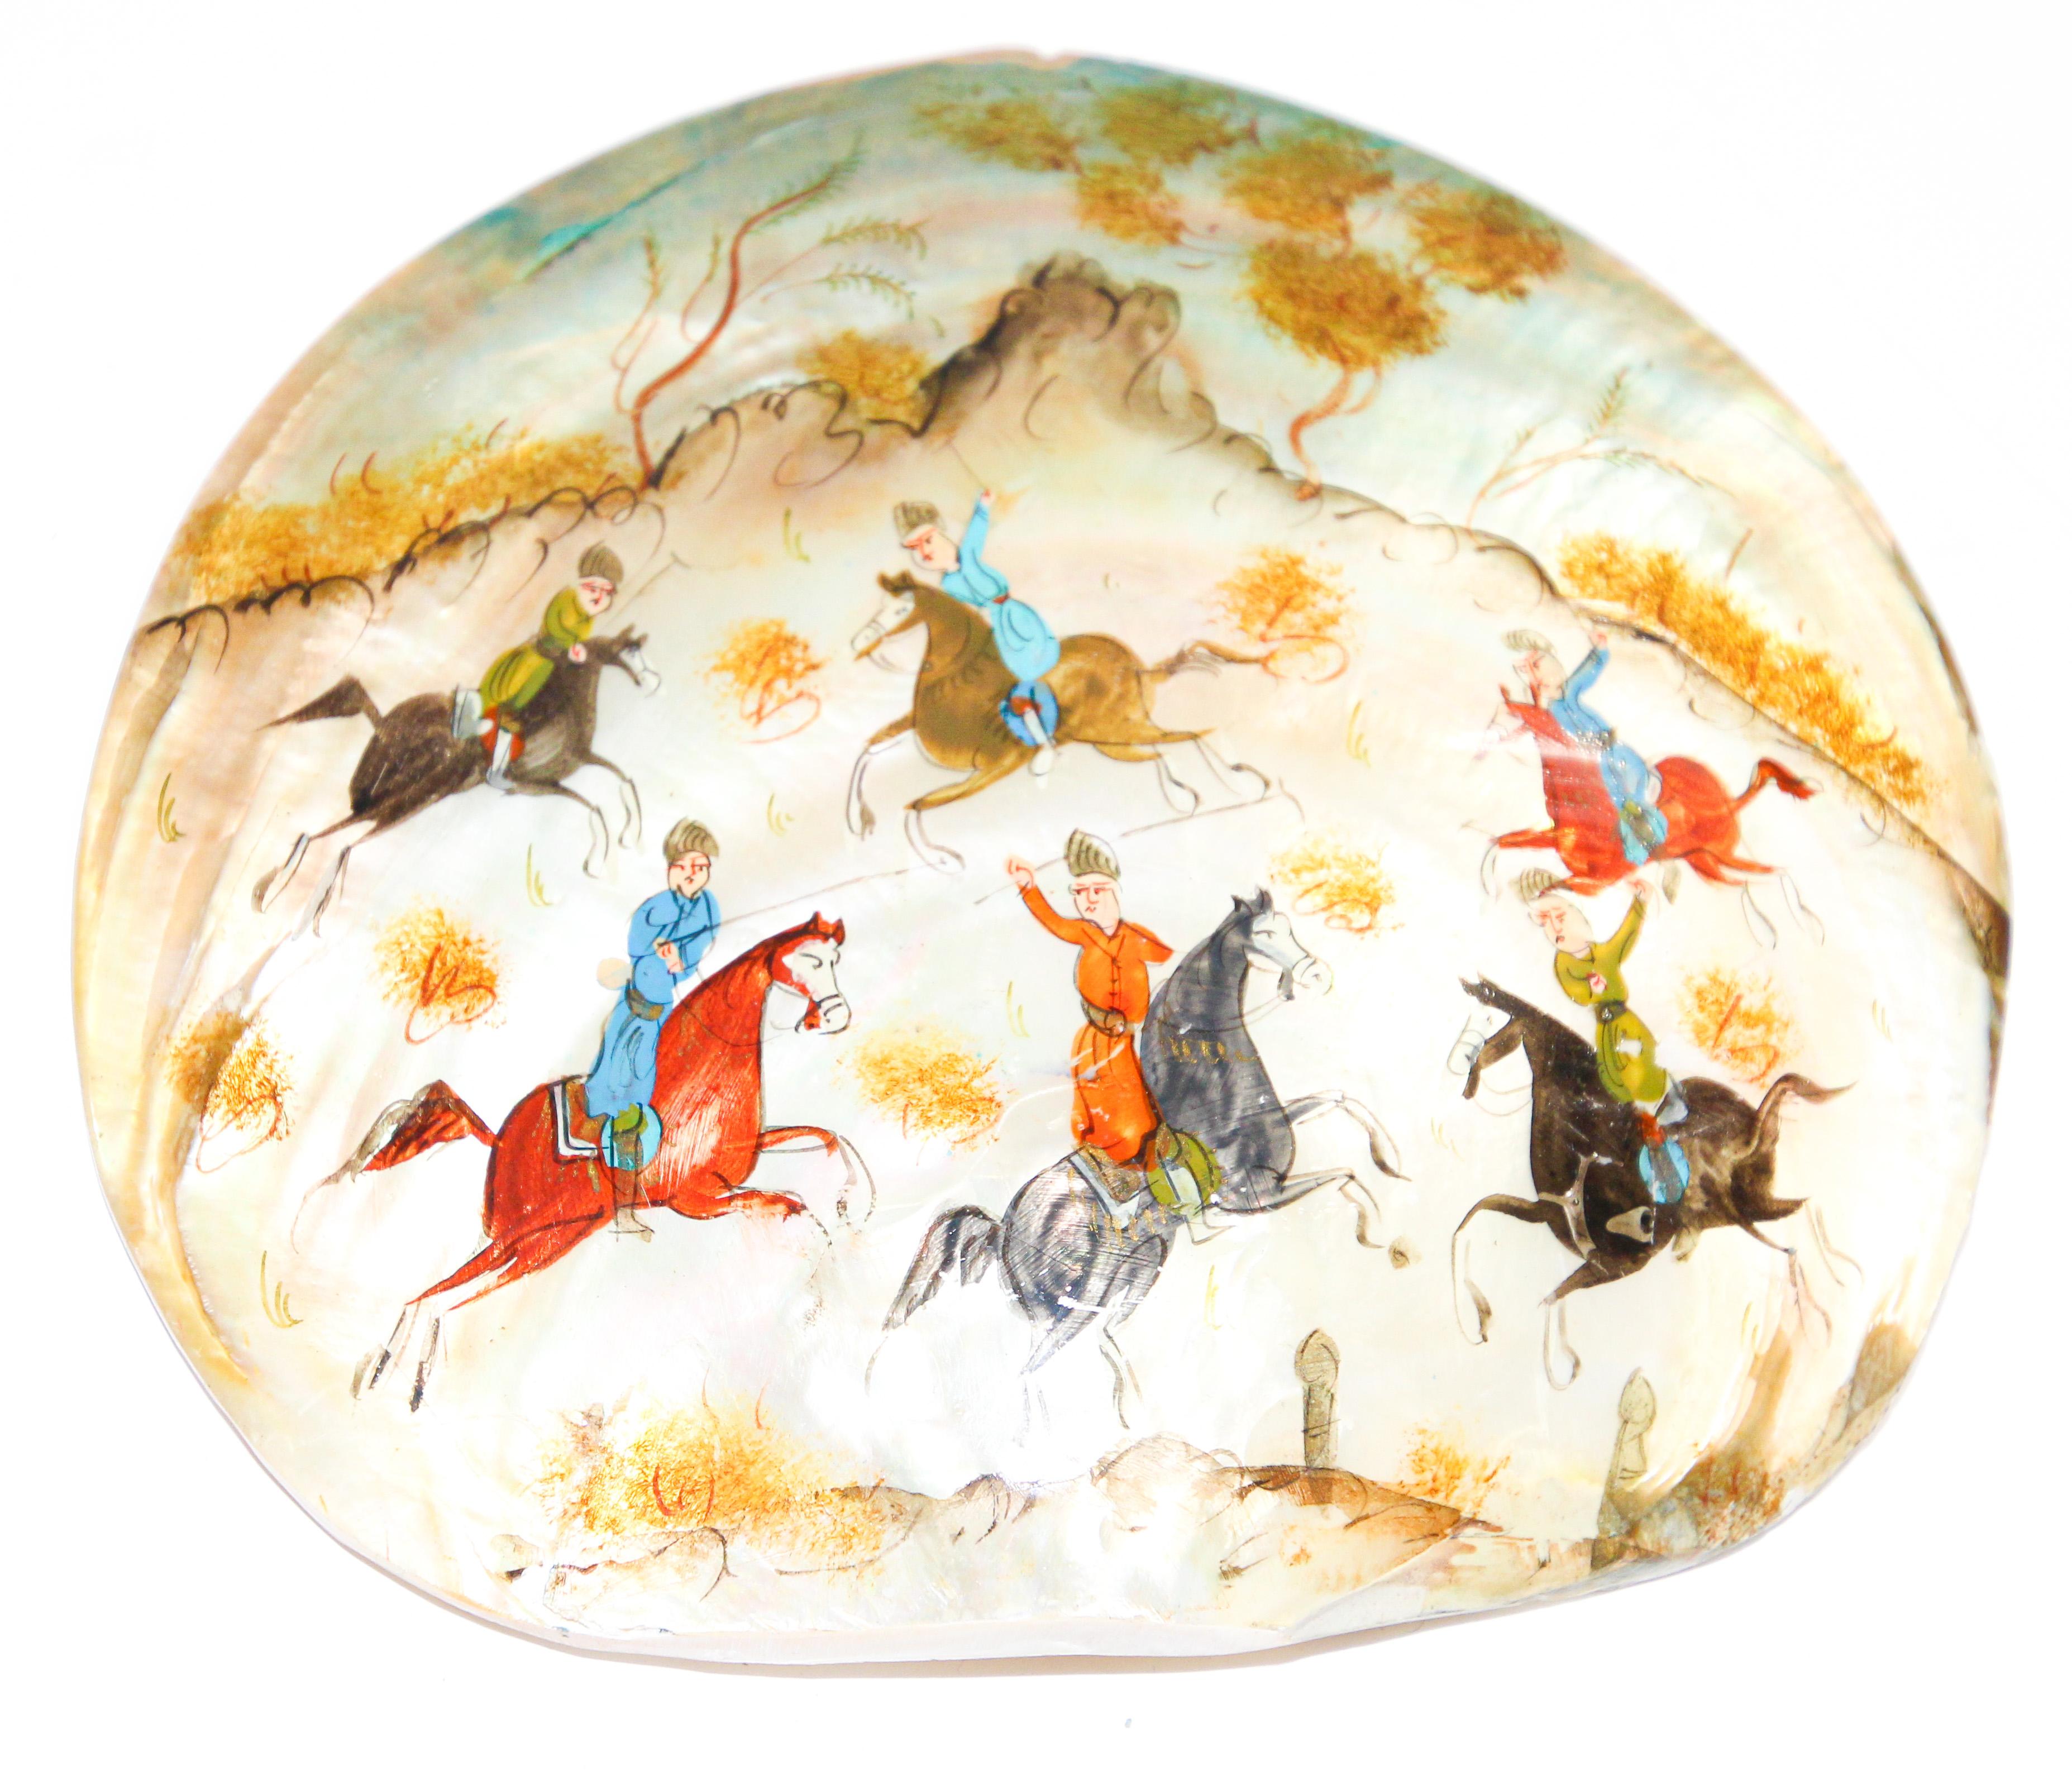 Hand Painted Asian Persian miniature painting on a sea oyster shell.
Middle Eastern Moorish design miniature painting on shell, very fine and colorful painting of men on horses playing polo.
Persian miniature painting on mother of pearl shell